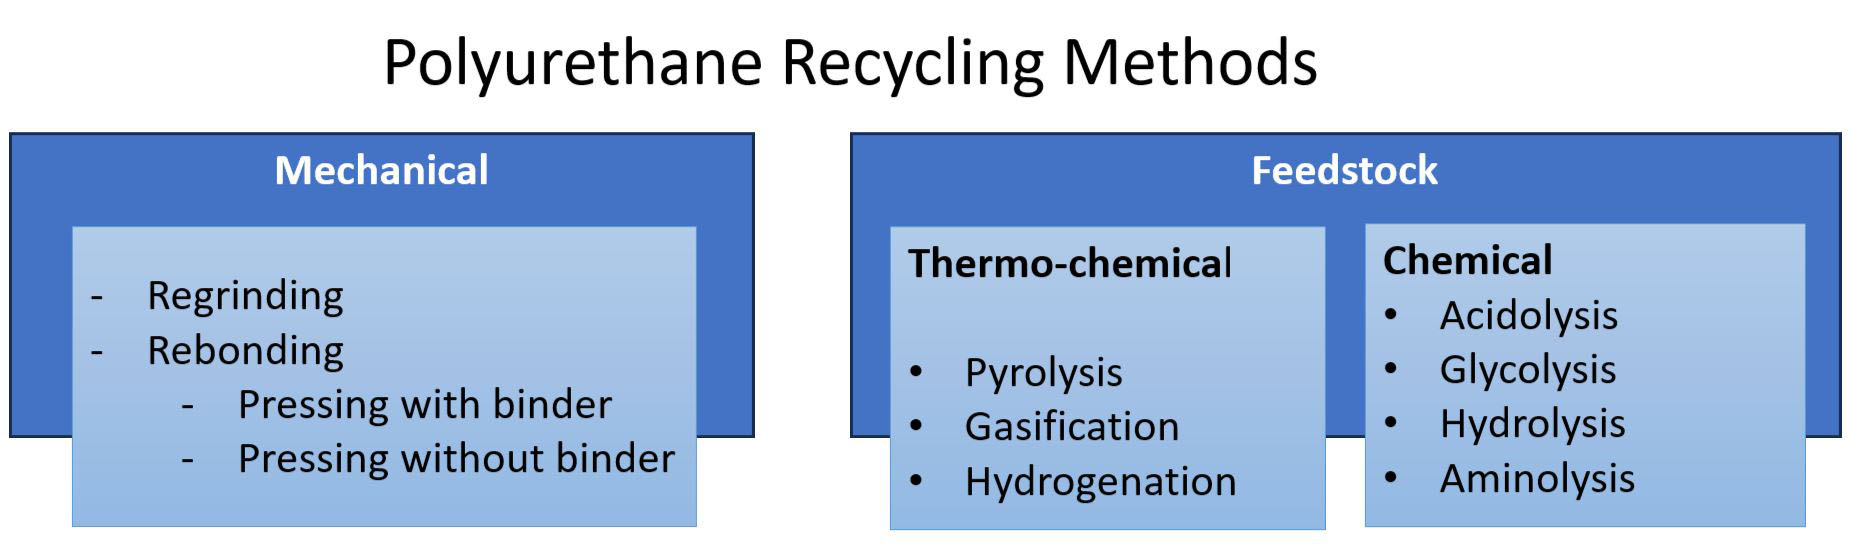 Several methods are available for recycling PU: mechanical recycling, monomer recovery, feedstock recycling, incineration, and landfill. Nevertheless, innovative recycling methods like thermochemical, generate highly reactive building blocks, such as C2 and C3, which are essential for producing valuable intermediates and chemicals. 